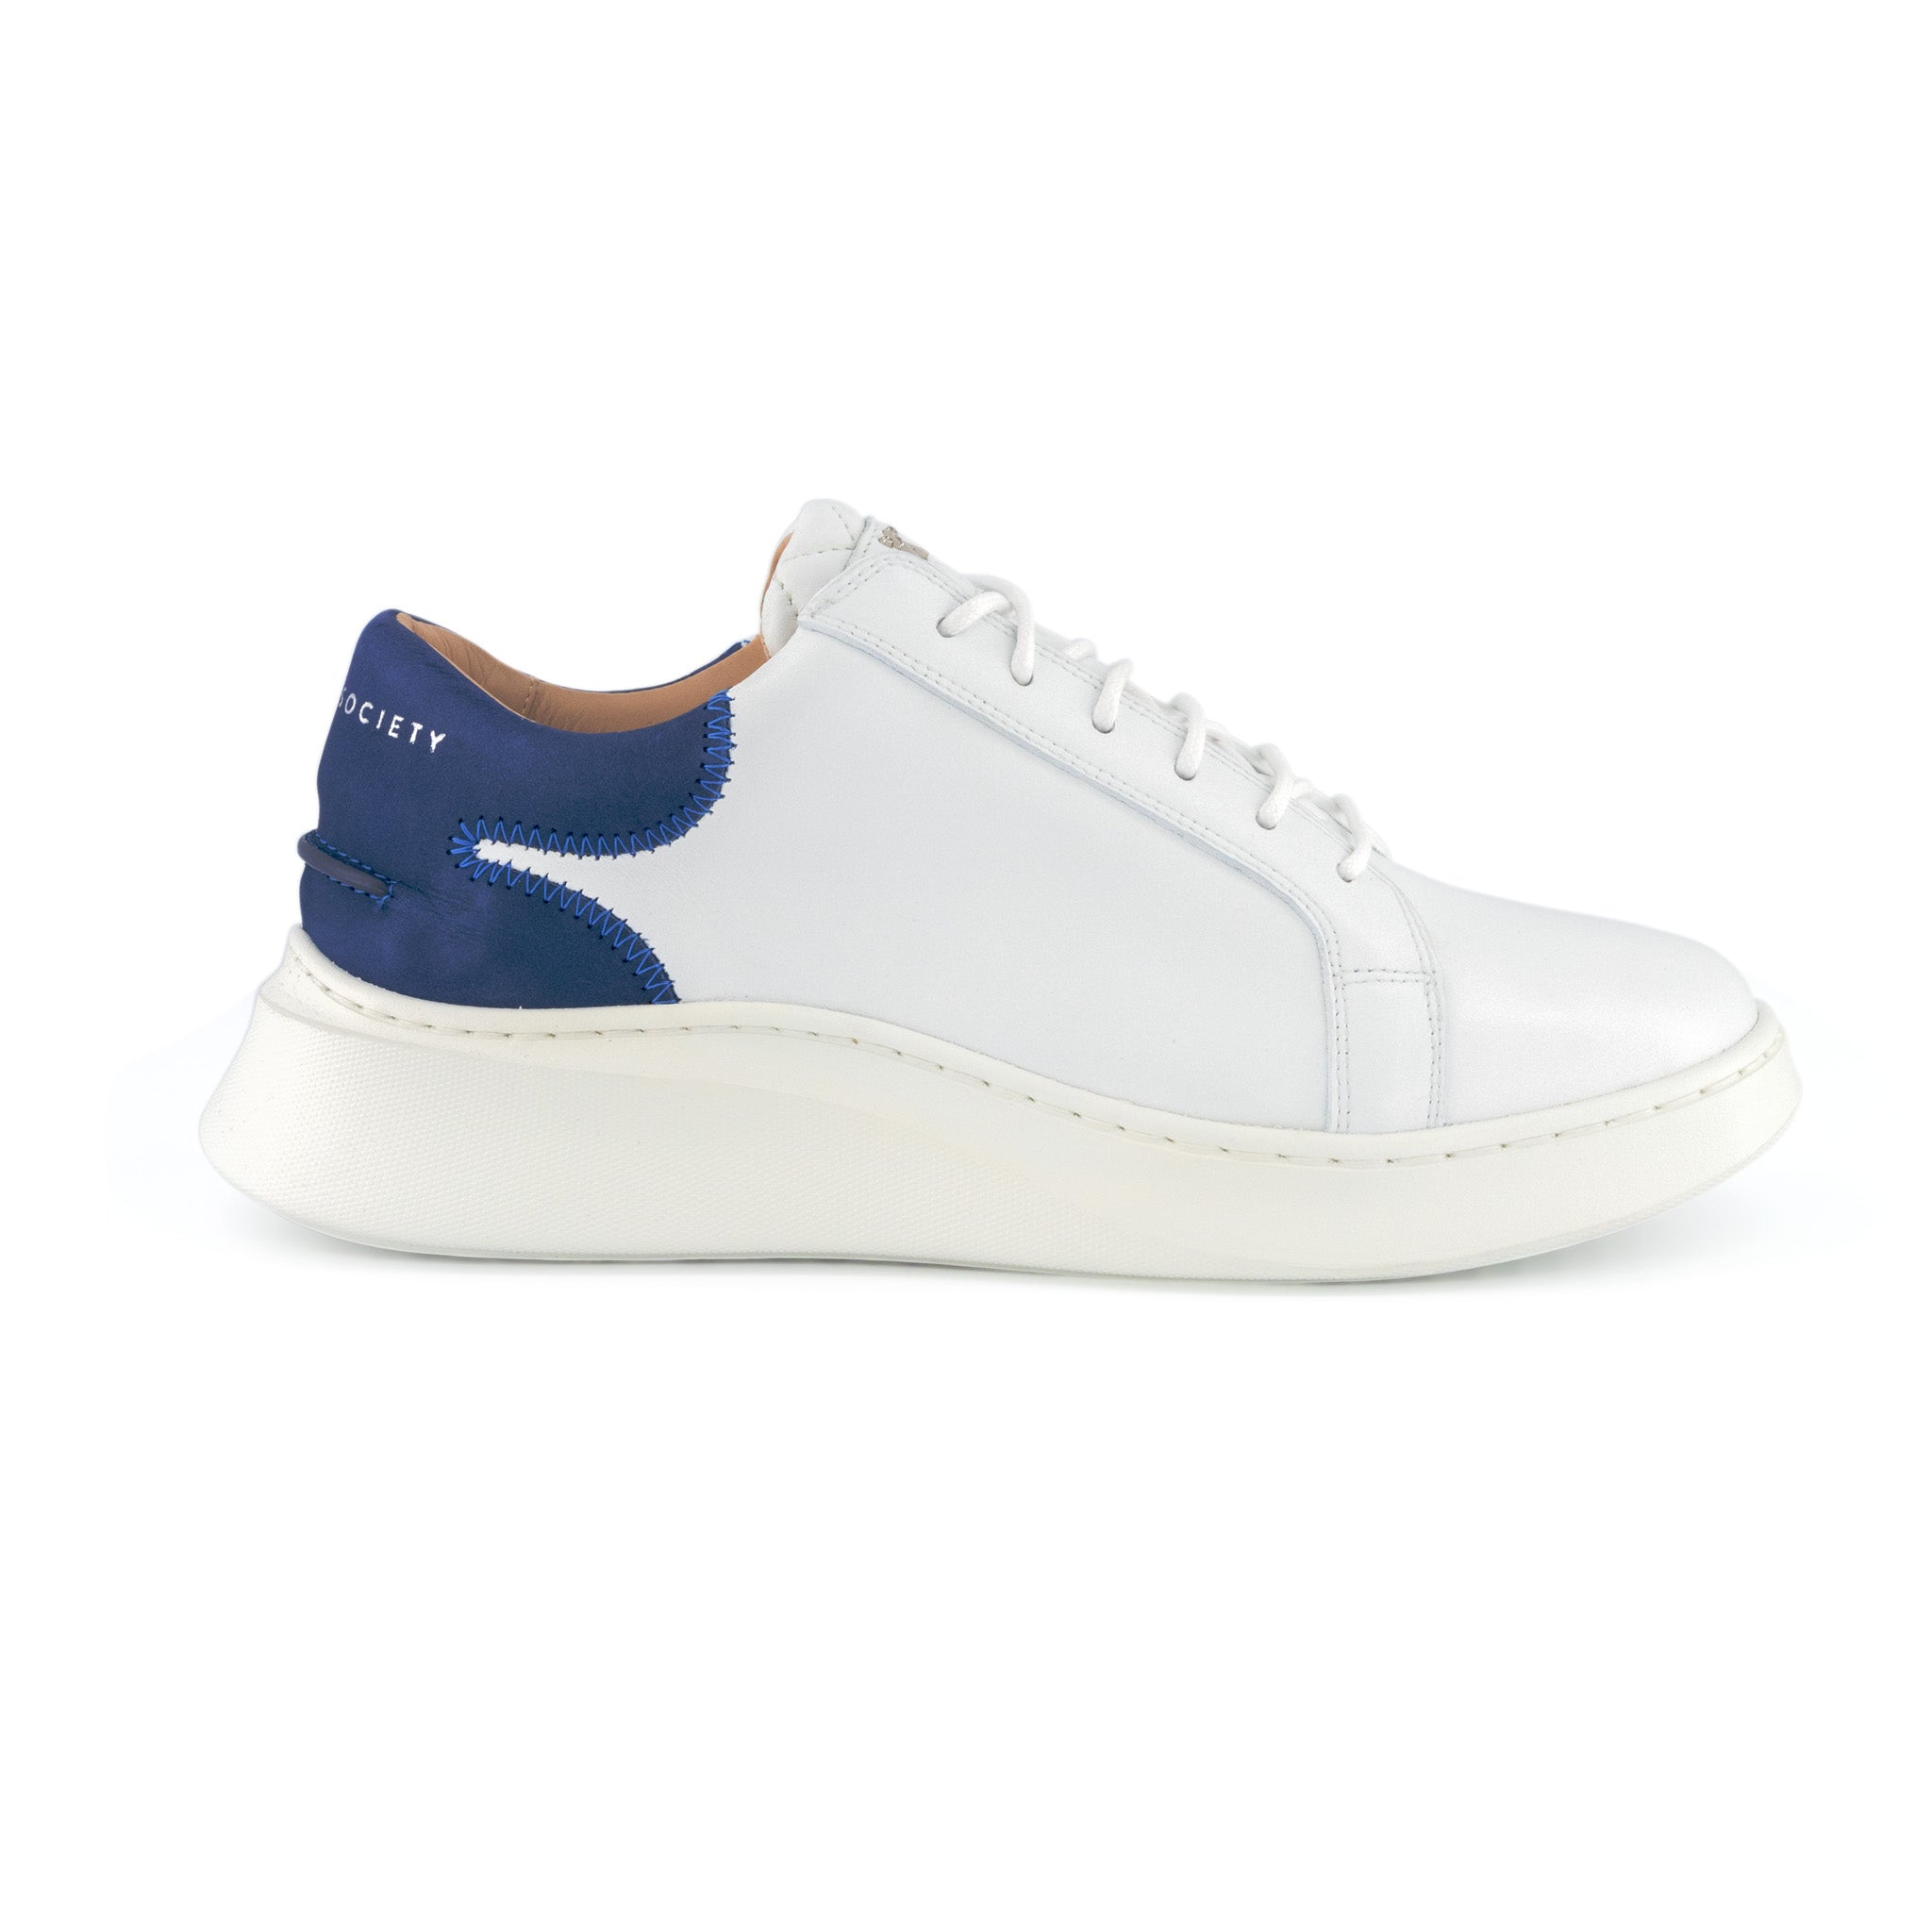 Matteo Low Top Sneaker | White & Royal Blue Full Grain Leather | White Outsole | Made in Italy | size 38 & 39